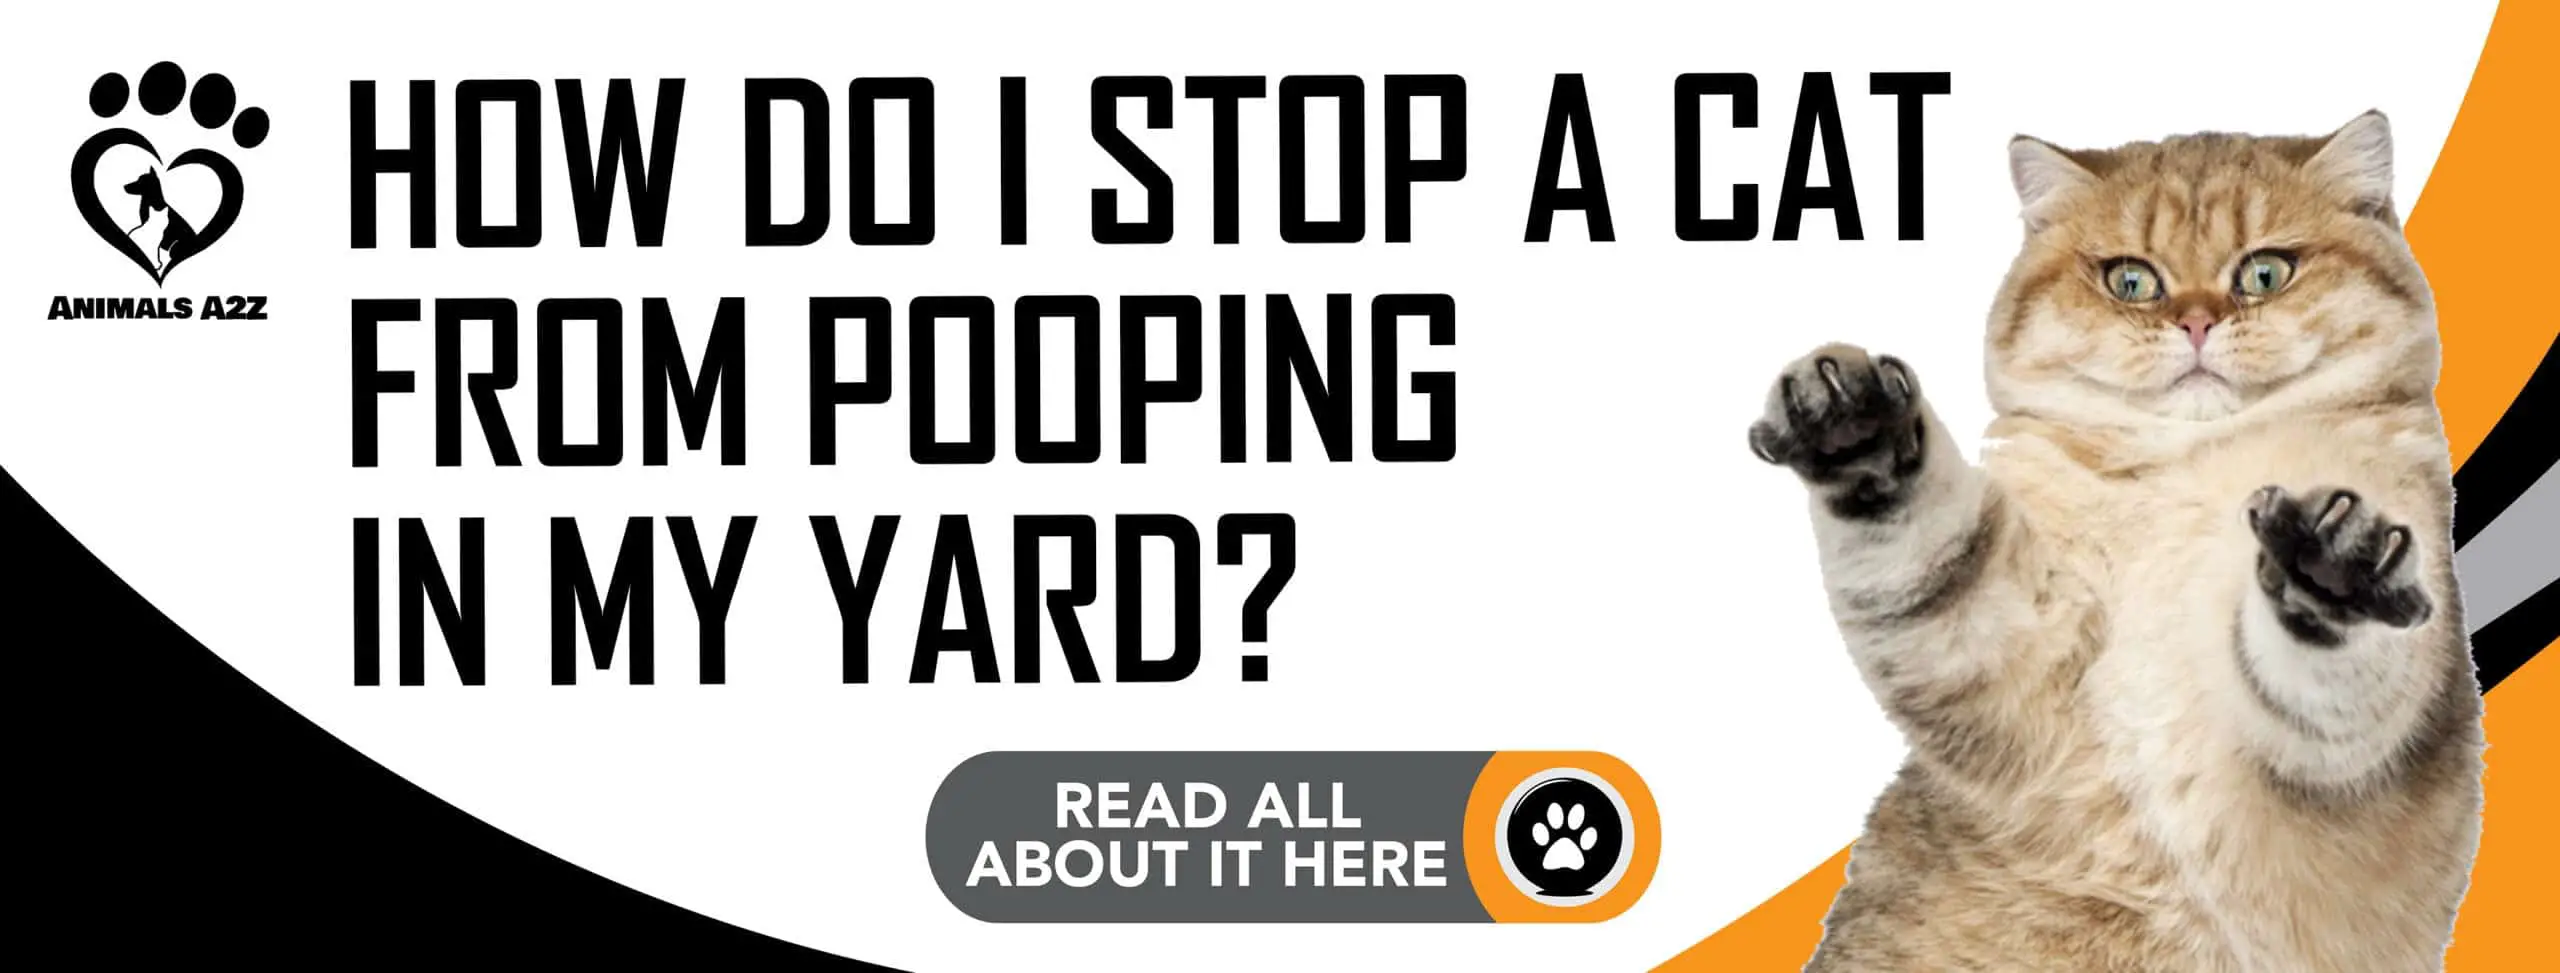 How do I stop a cat from pooping in my yard